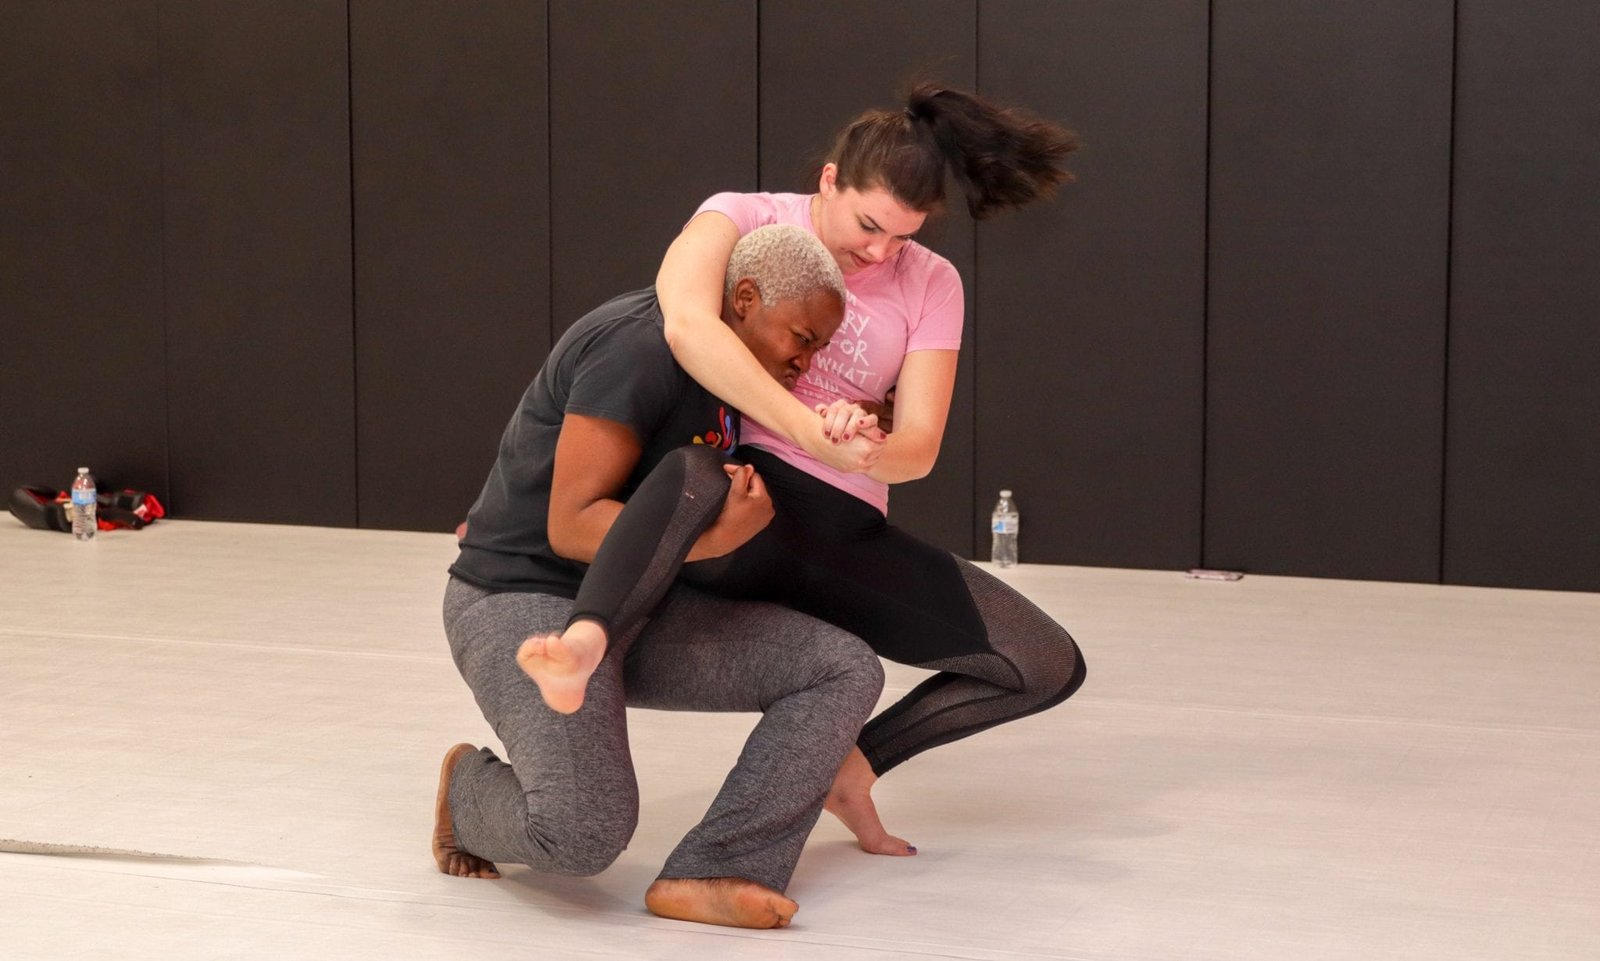 two women learning grappling moves